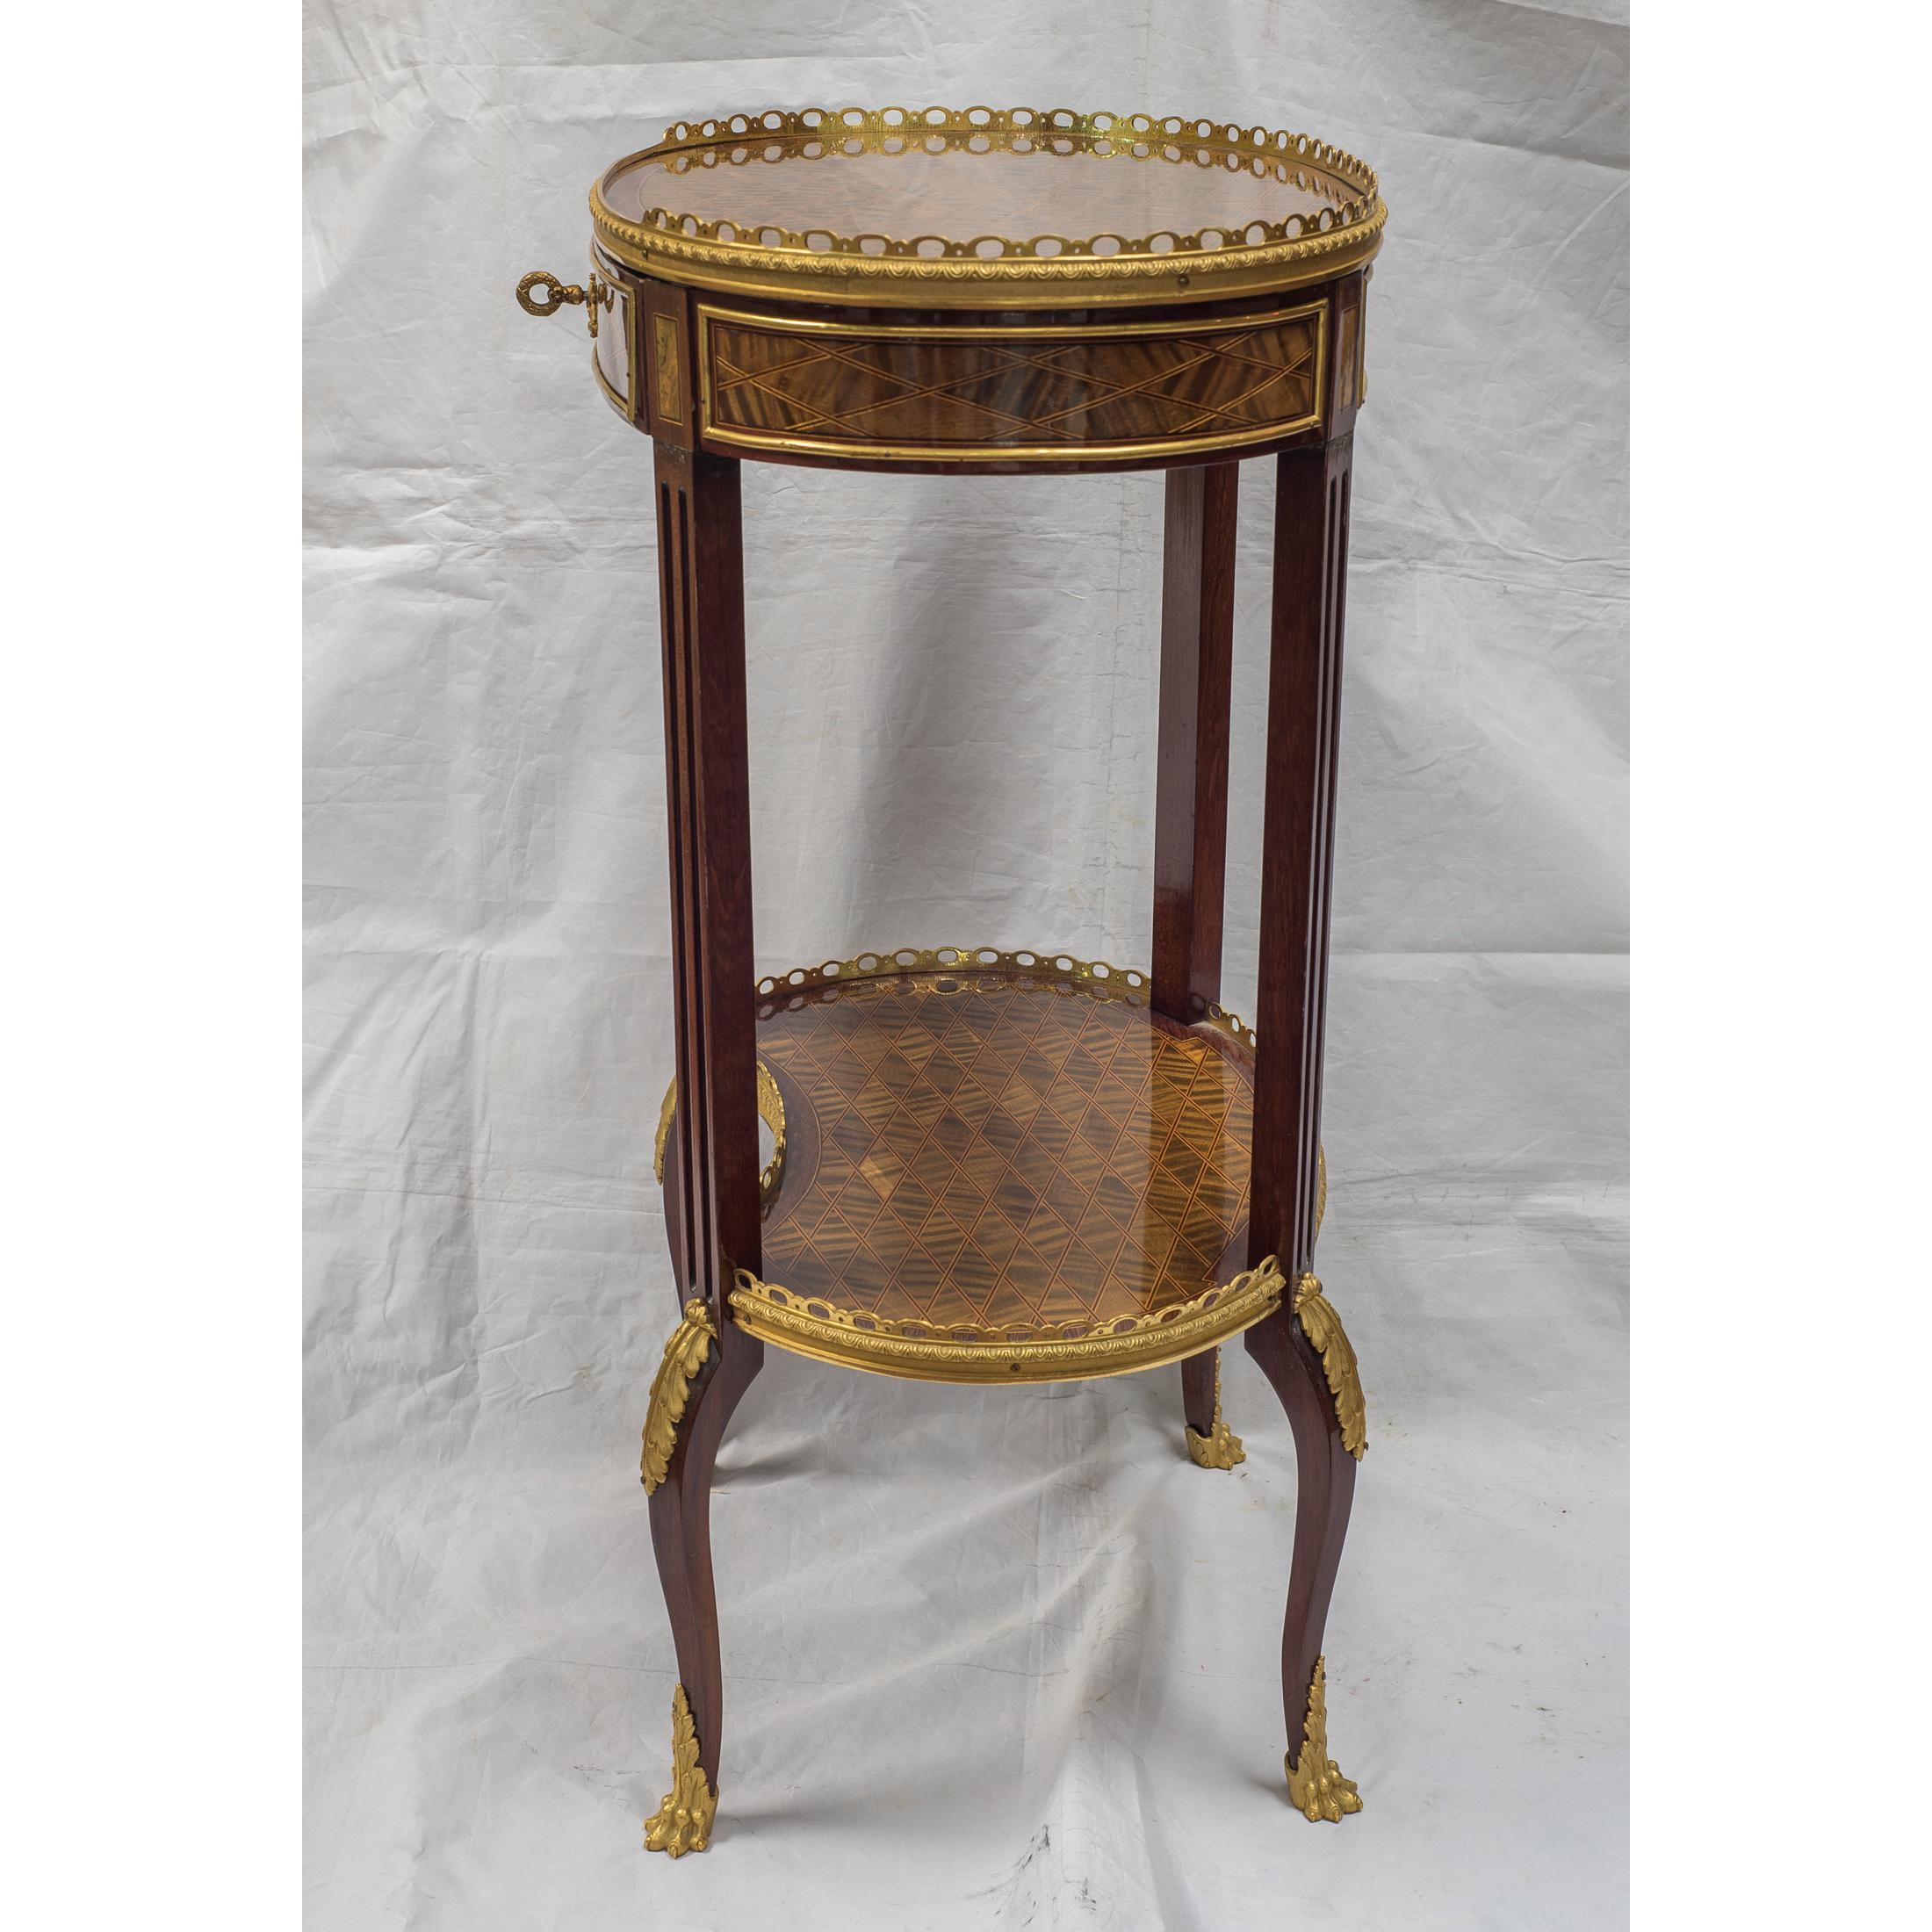 French Louis XV-Style Ormolu-Mounted Inlaid Tulipwood and Mahogany Galleried Oval Table For Sale